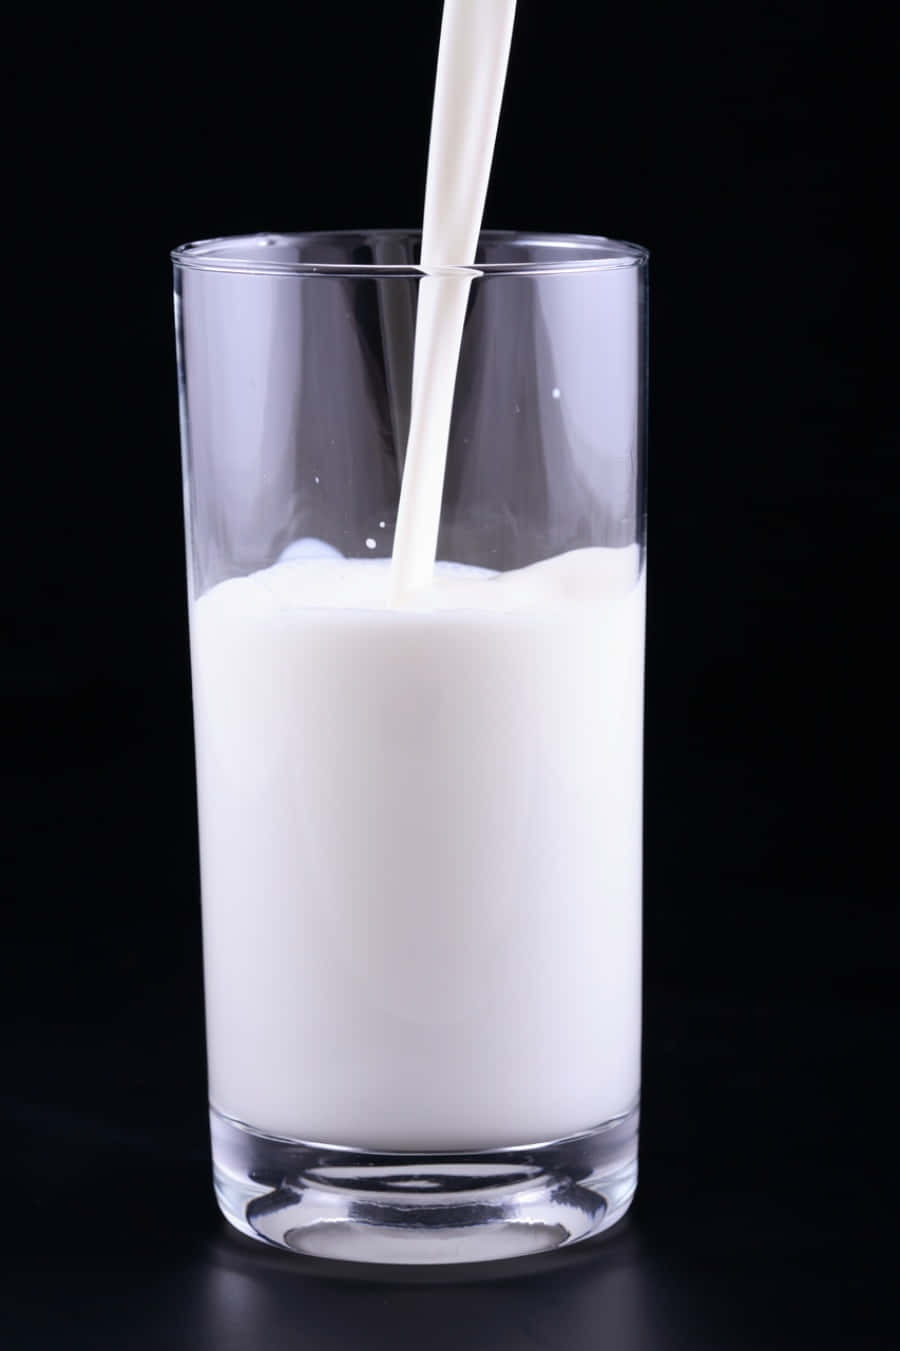 A Glass of Milk - Nutrition for the Whole Family